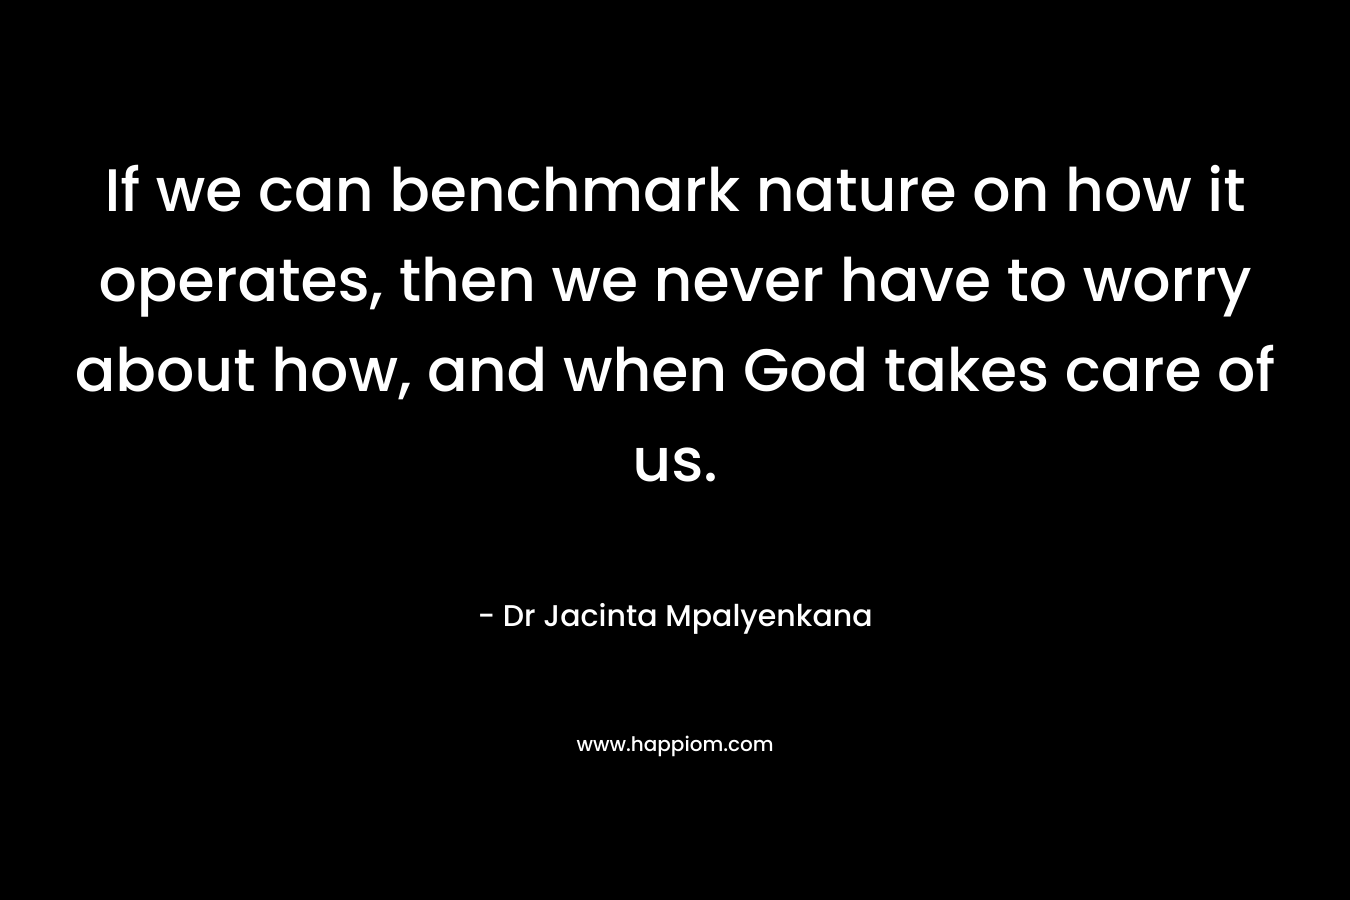 If we can benchmark nature on how it operates, then we never have to worry about how, and when God takes care of us. – Dr Jacinta Mpalyenkana